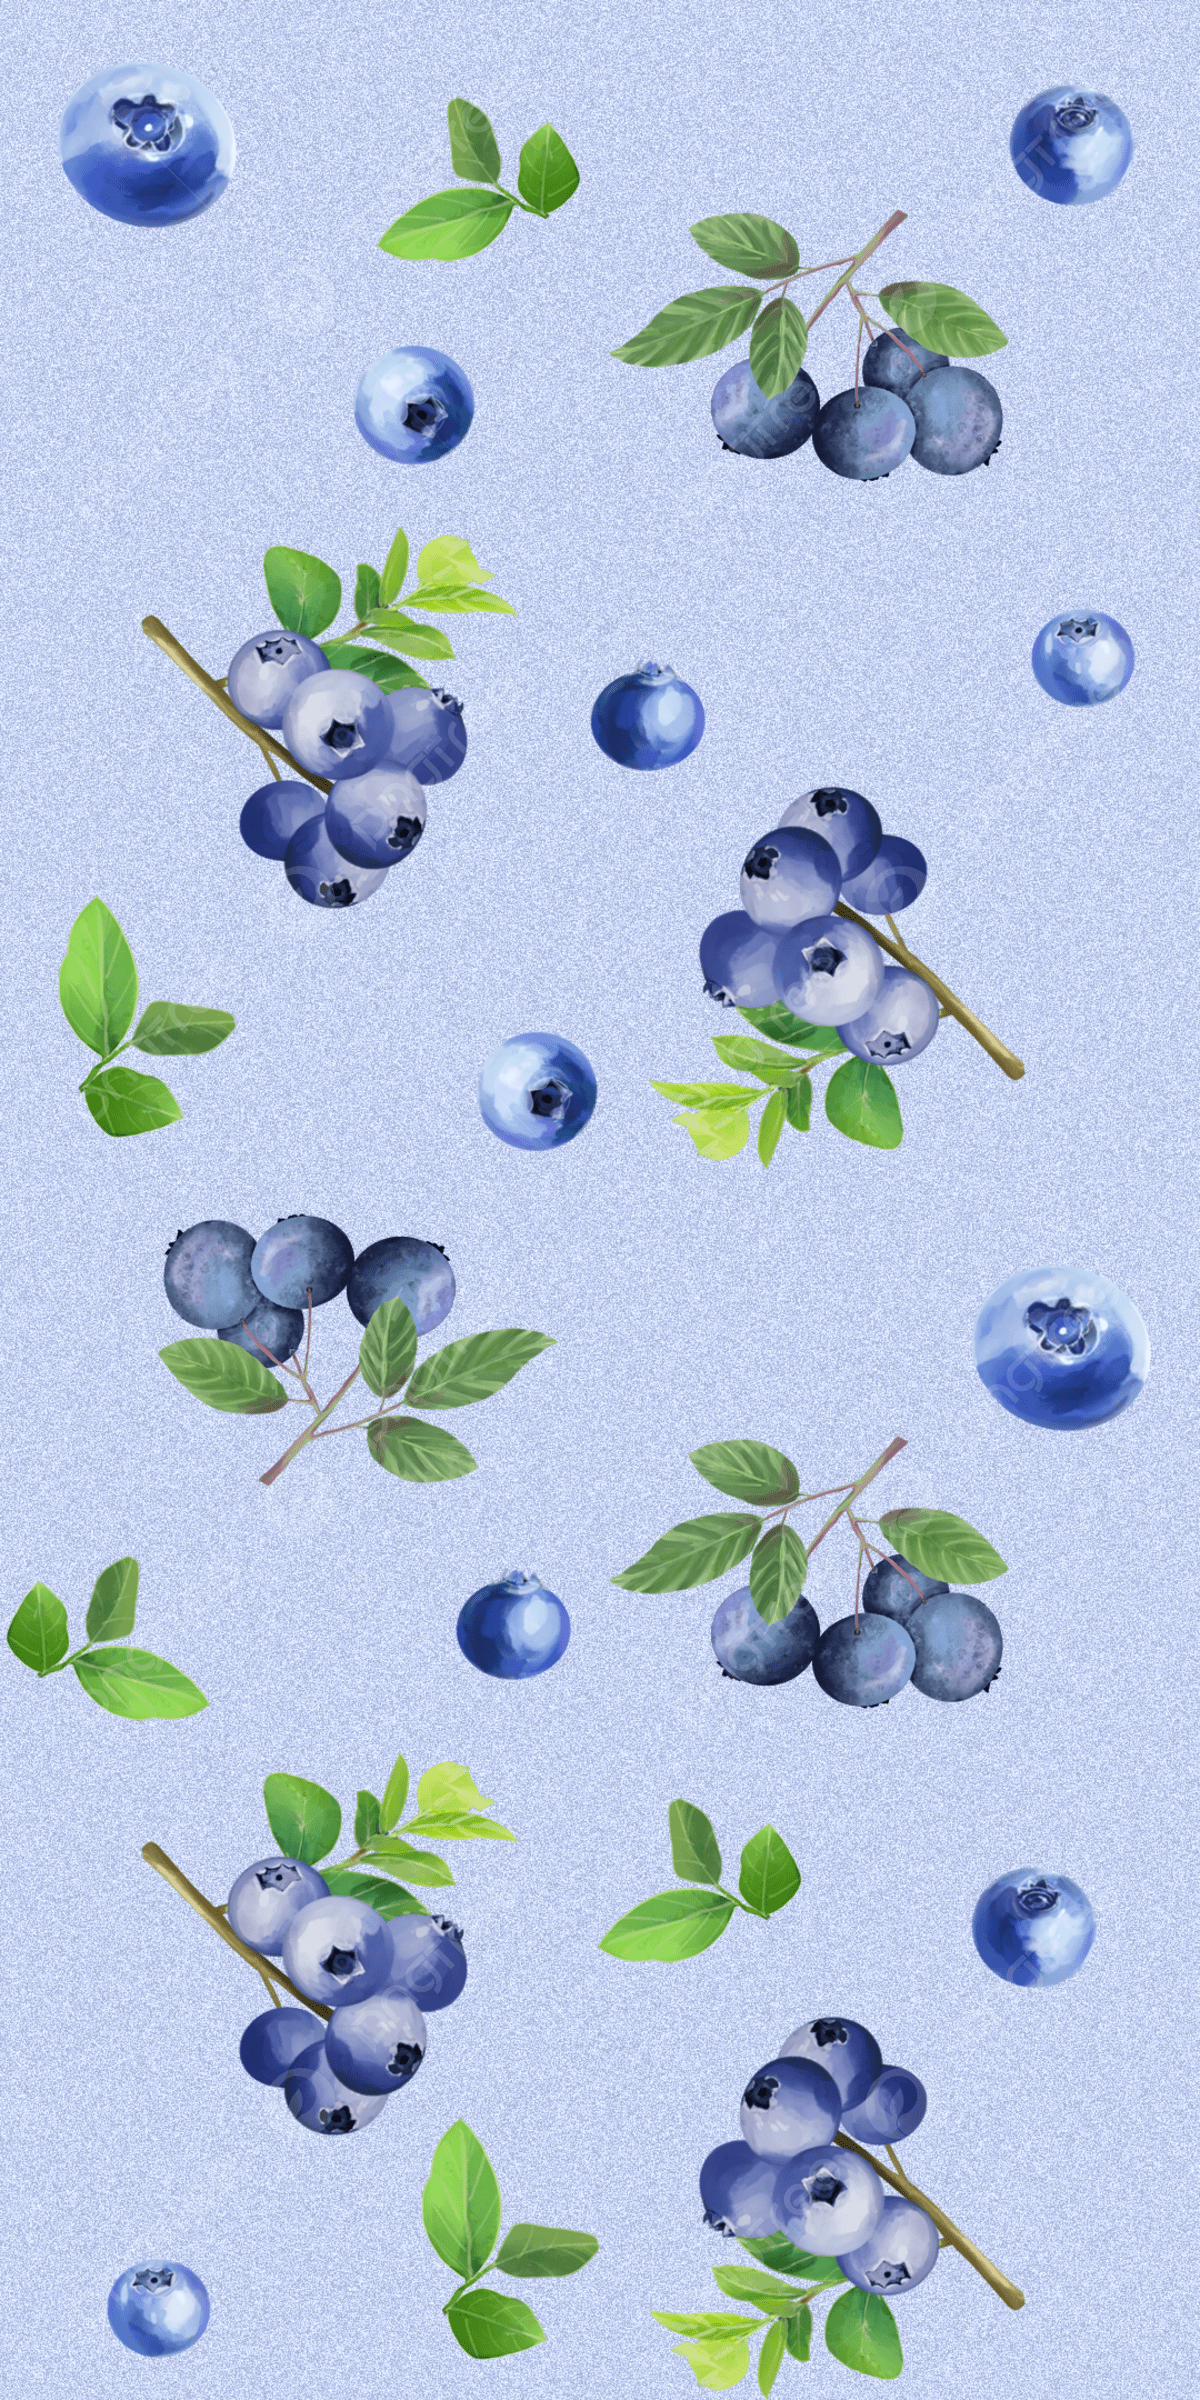 Fruit Wallpaper Watercolor Green Leaves Blueberry Background Wallpaper Image For Free Download